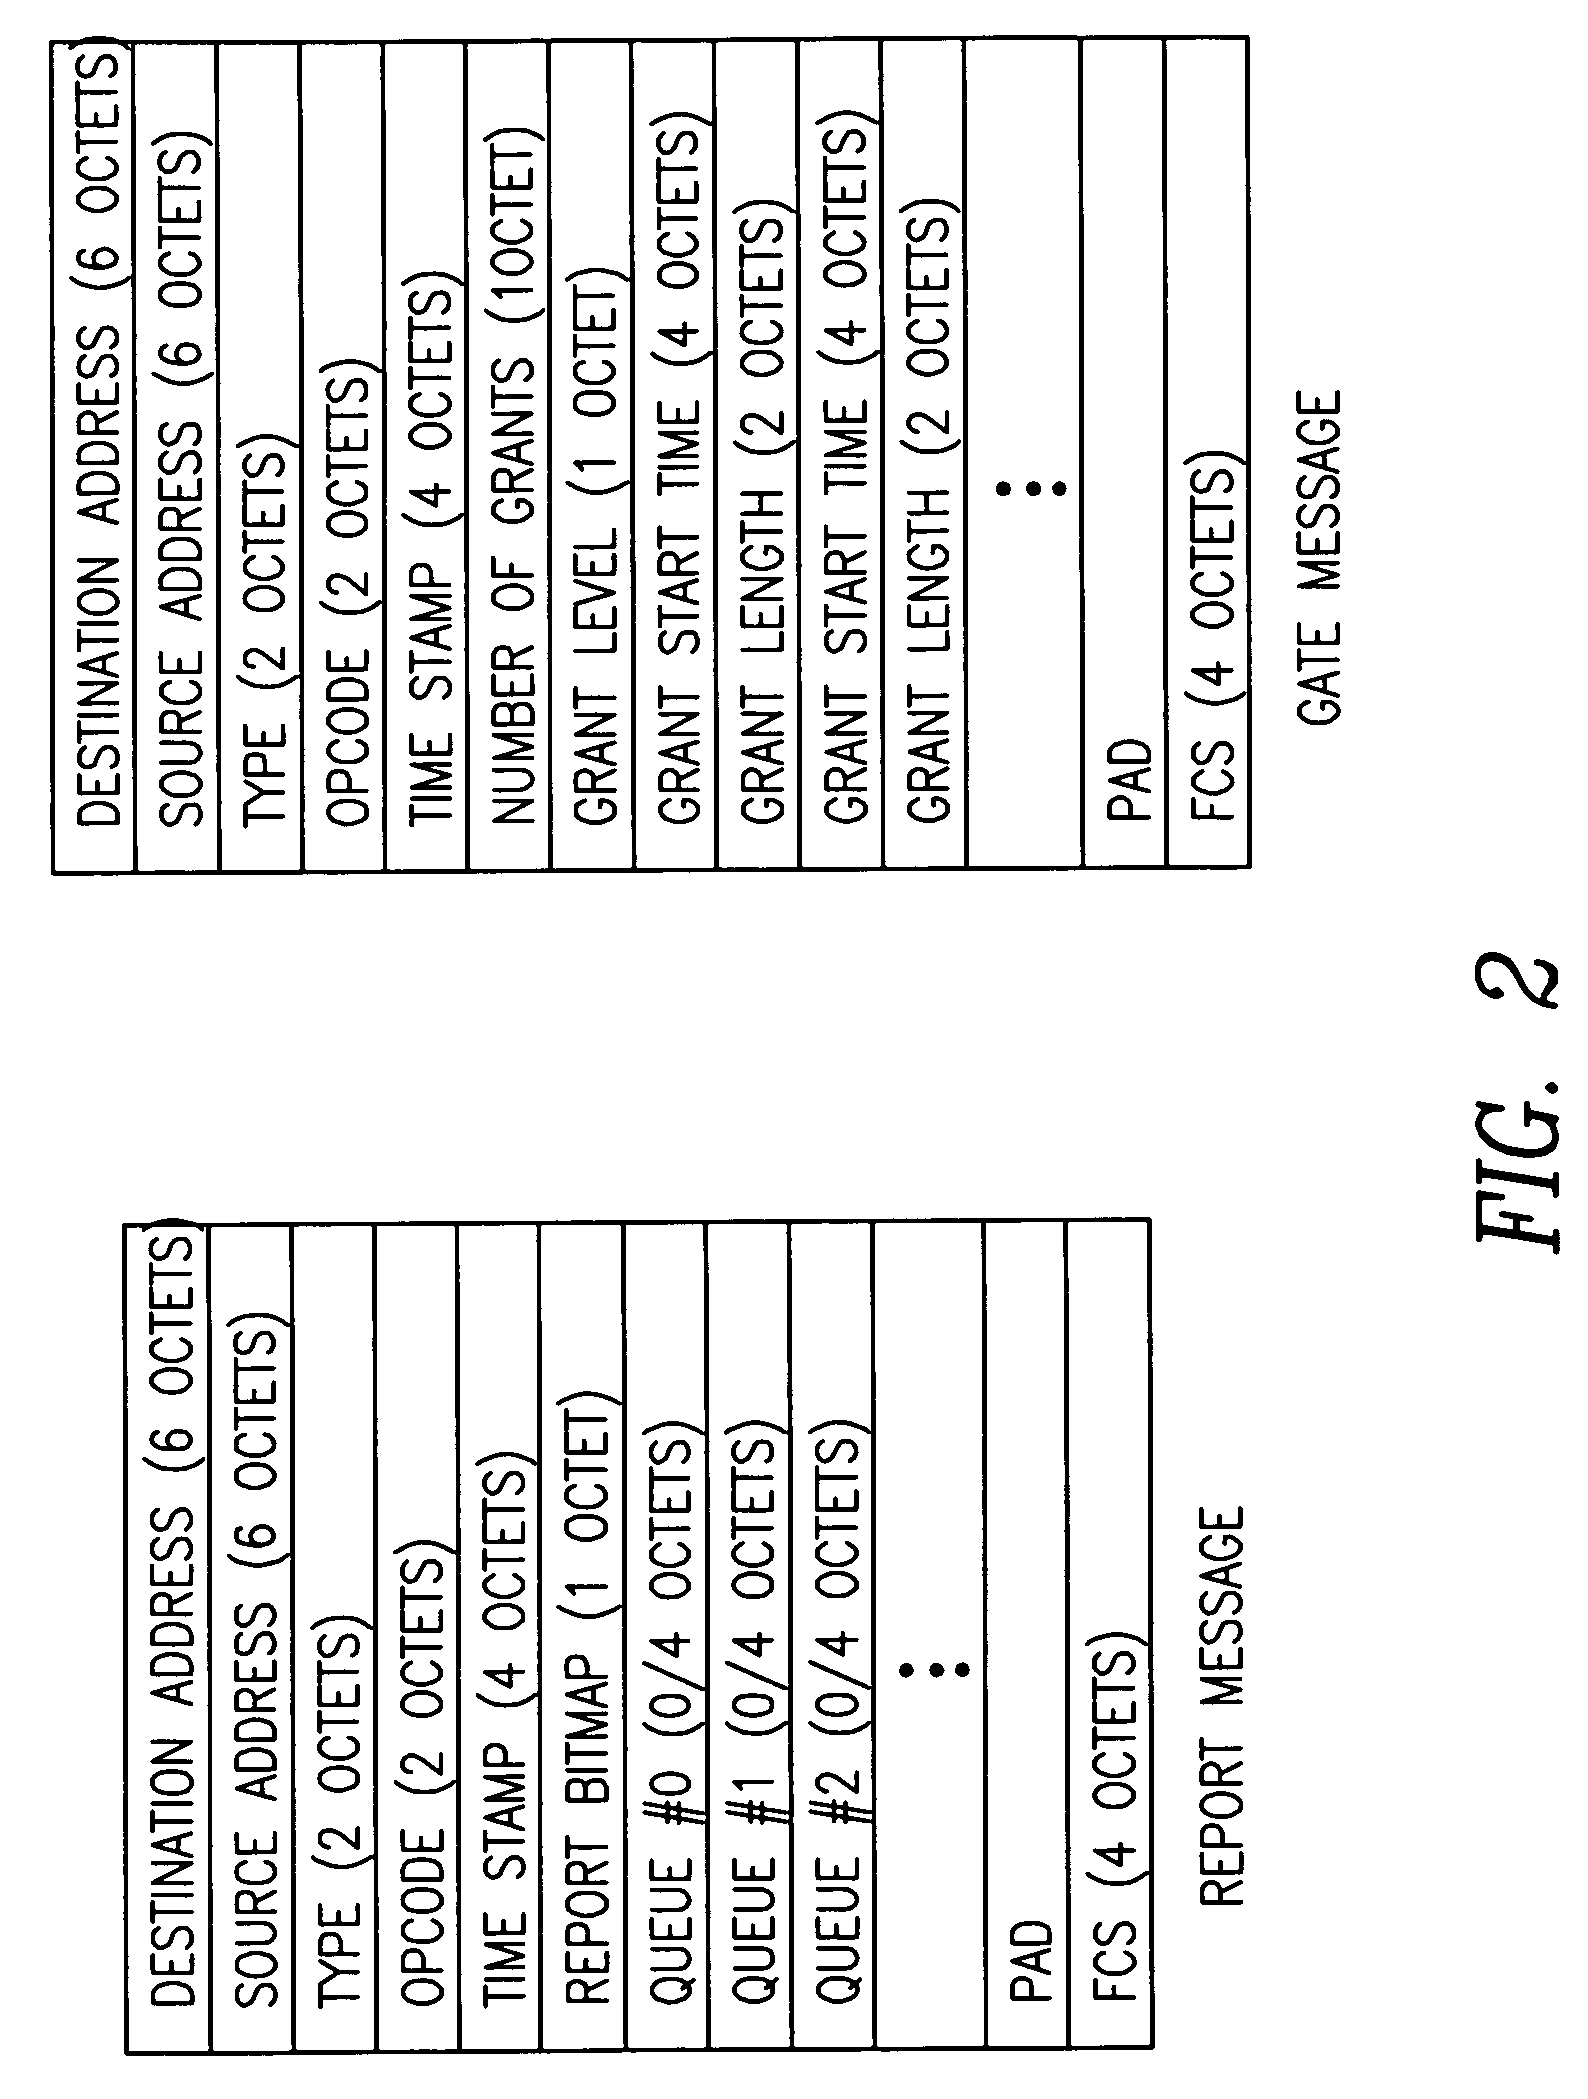 Dynamic bandwidth allocation and service differentiation for broadband passive optical networks